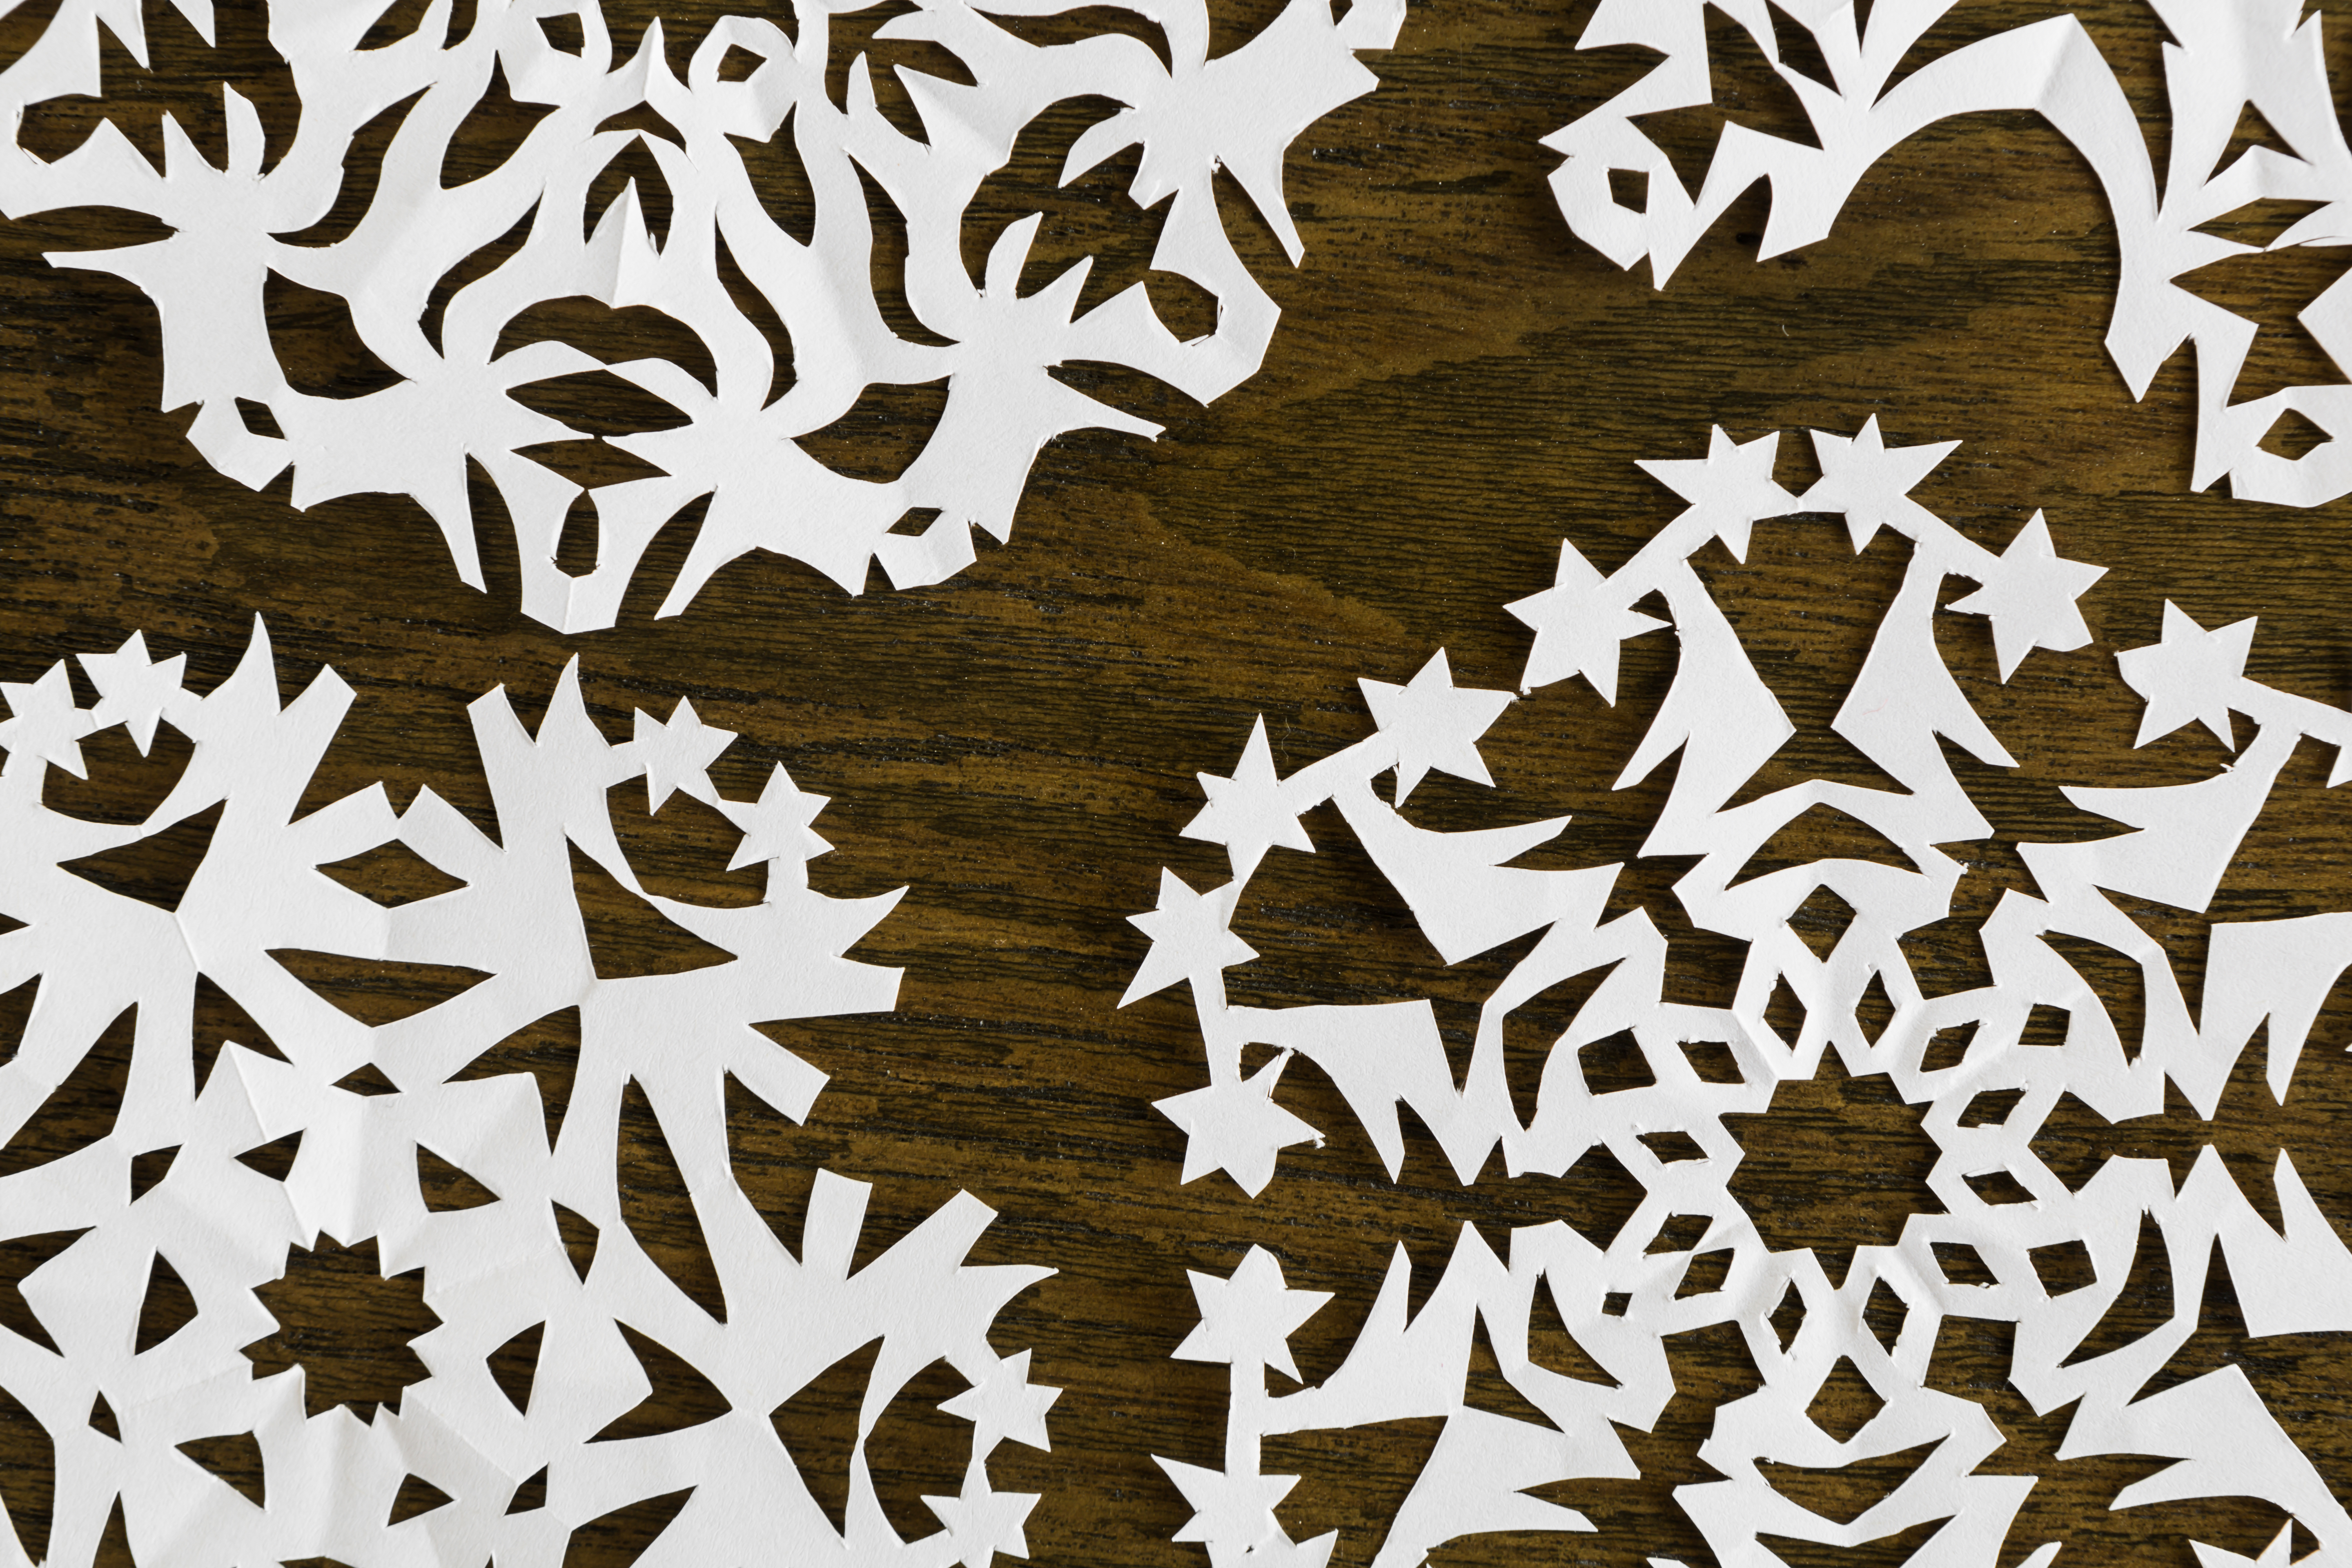 Winter Snowflake hole punch project